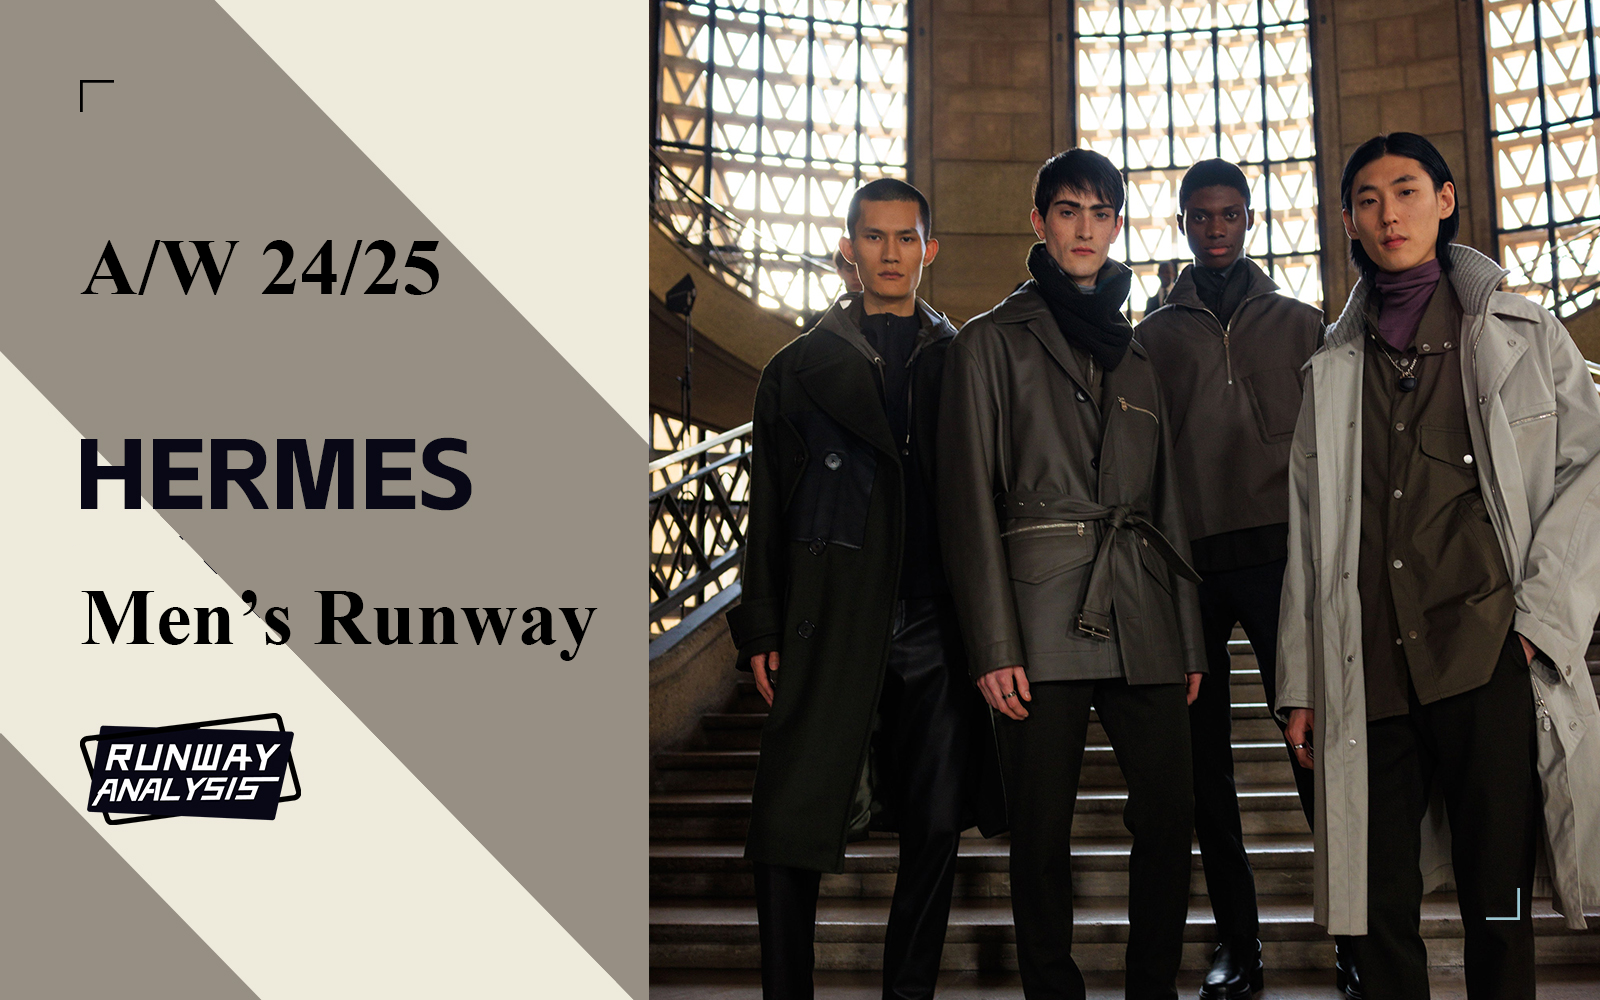 The Beauty of Contradiction -- The Runway Analysis of Hermes